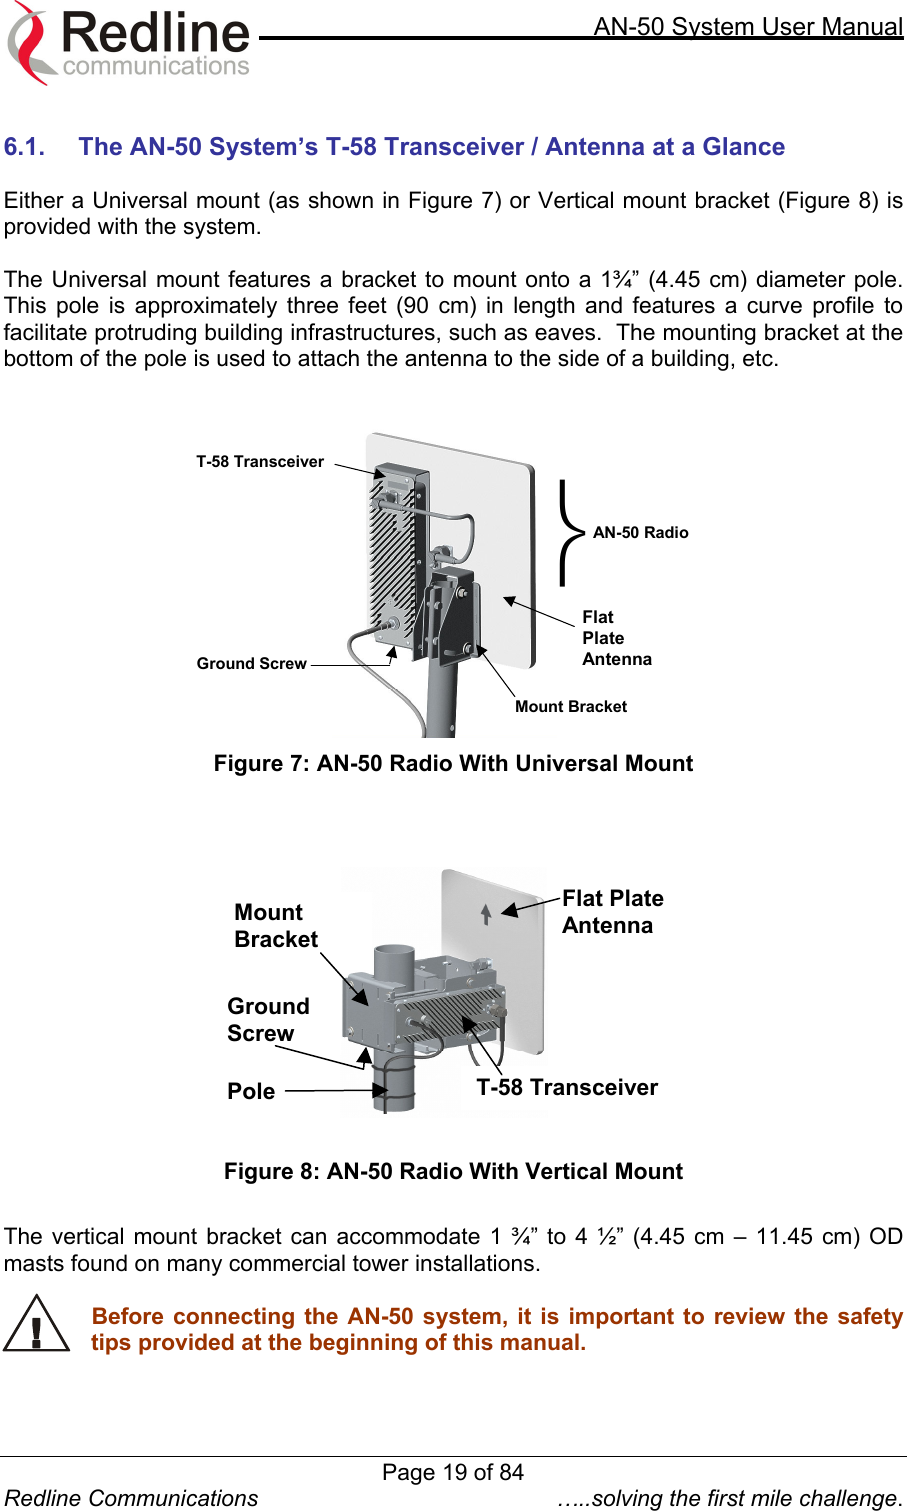     AN-50 System User Manual  Redline Communications  …..solving the first mile challenge.  6.1.  The AN-50 System’s T-58 Transceiver / Antenna at a Glance  Either a Universal mount (as shown in Figure 7) or Vertical mount bracket (Figure 8) is provided with the system.    The Universal mount features a bracket to mount onto a 1¾” (4.45 cm) diameter pole. This pole is approximately three feet (90 cm) in length and features a curve profile to facilitate protruding building infrastructures, such as eaves.  The mounting bracket at the bottom of the pole is used to attach the antenna to the side of a building, etc.     FlatPlate Antenna T-58 Transceiver AN-50 RadioGround Screw Mount Bracket  Figure 7: AN-50 Radio With Universal Mount     Ground Screw Flat Plate Antenna T-58 Transceiver Mount Bracket Pole    Figure 8: AN-50 Radio With Vertical Mount  The vertical mount bracket can accommodate 1 ¾” to 4 ½” (4.45 cm – 11.45 cm) OD masts found on many commercial tower installations.    Before connecting the AN-50 system, it is important to review the safety tips provided at the beginning of this manual.  Page 19 of 84